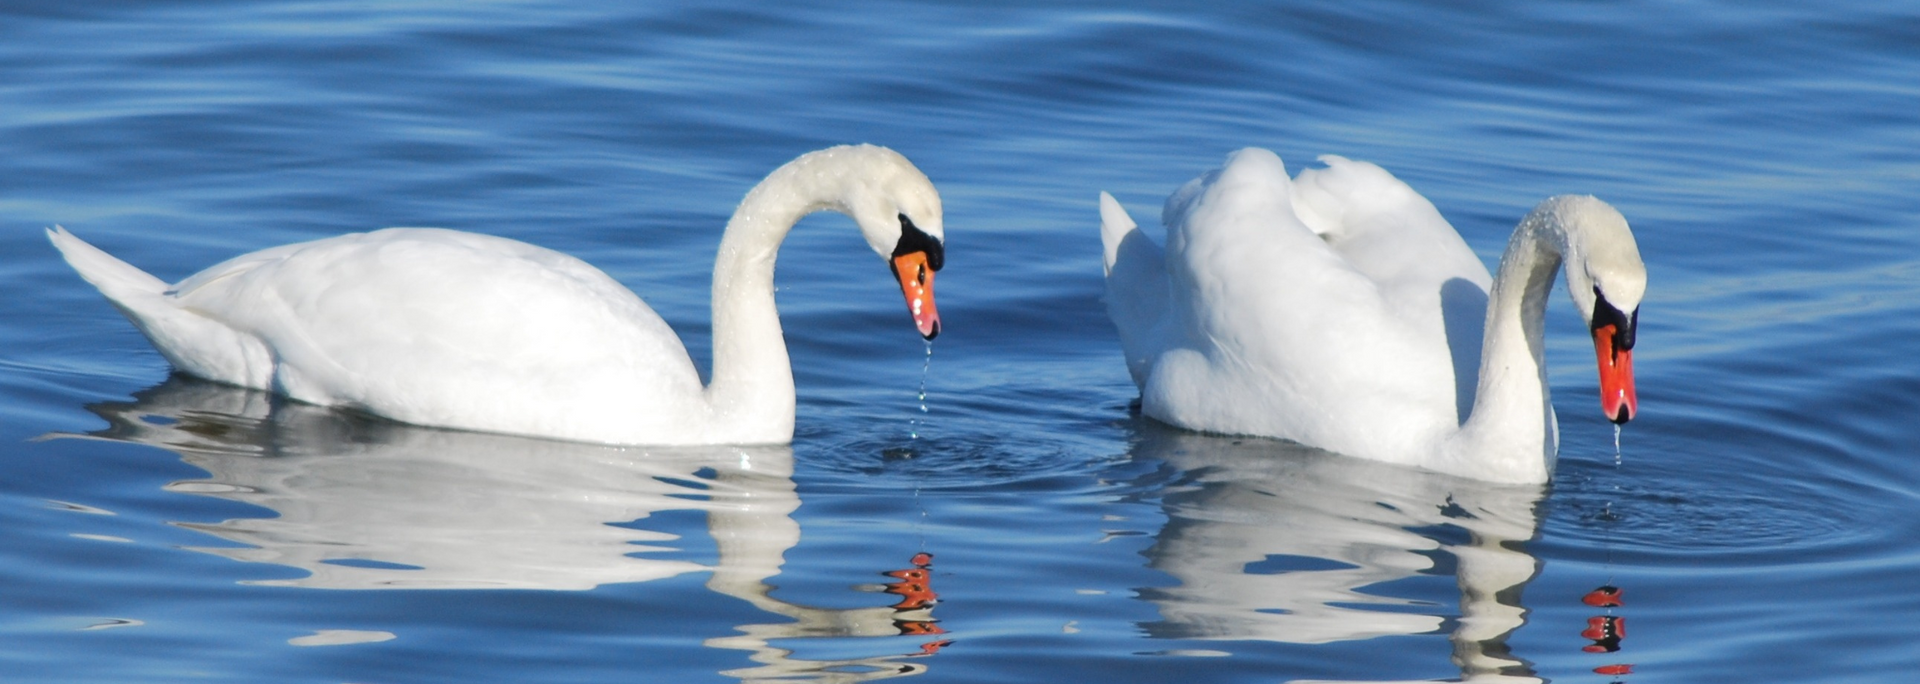 Picture of two Swans on water